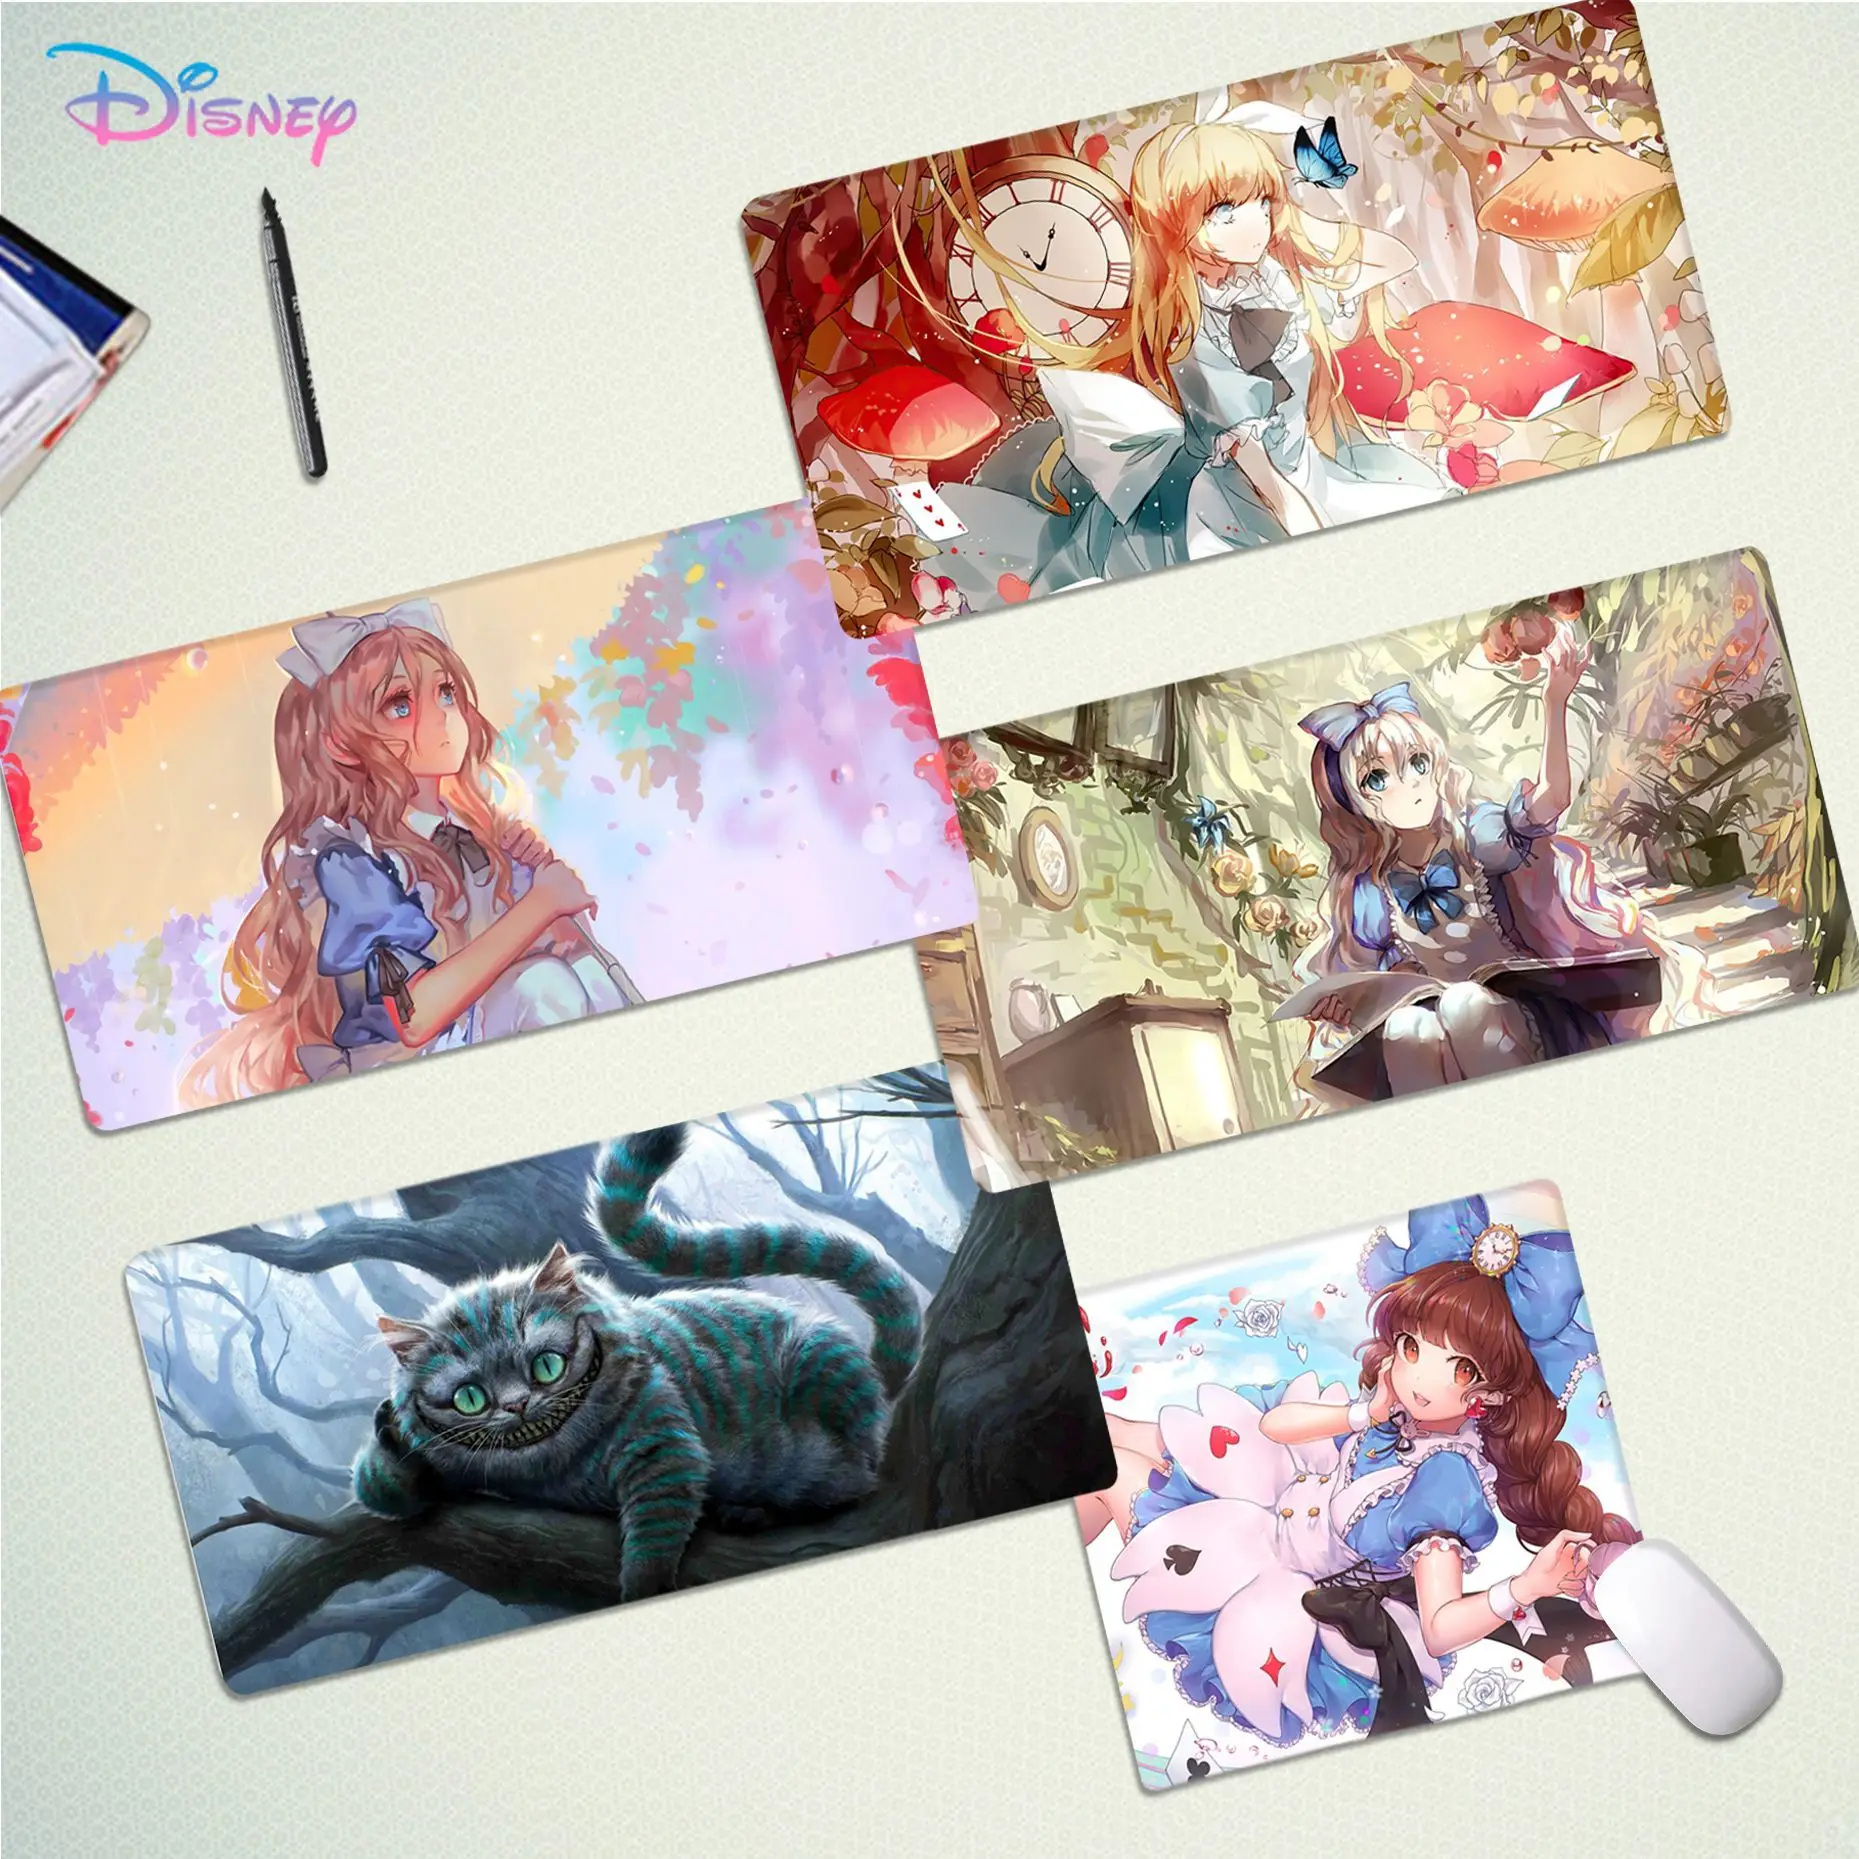 

Disney Alice In Wonderland Mousepad Beautiful large gaming mousepad L XL XXL gamer mouse pad Size for Keyboard Pad for Gamer